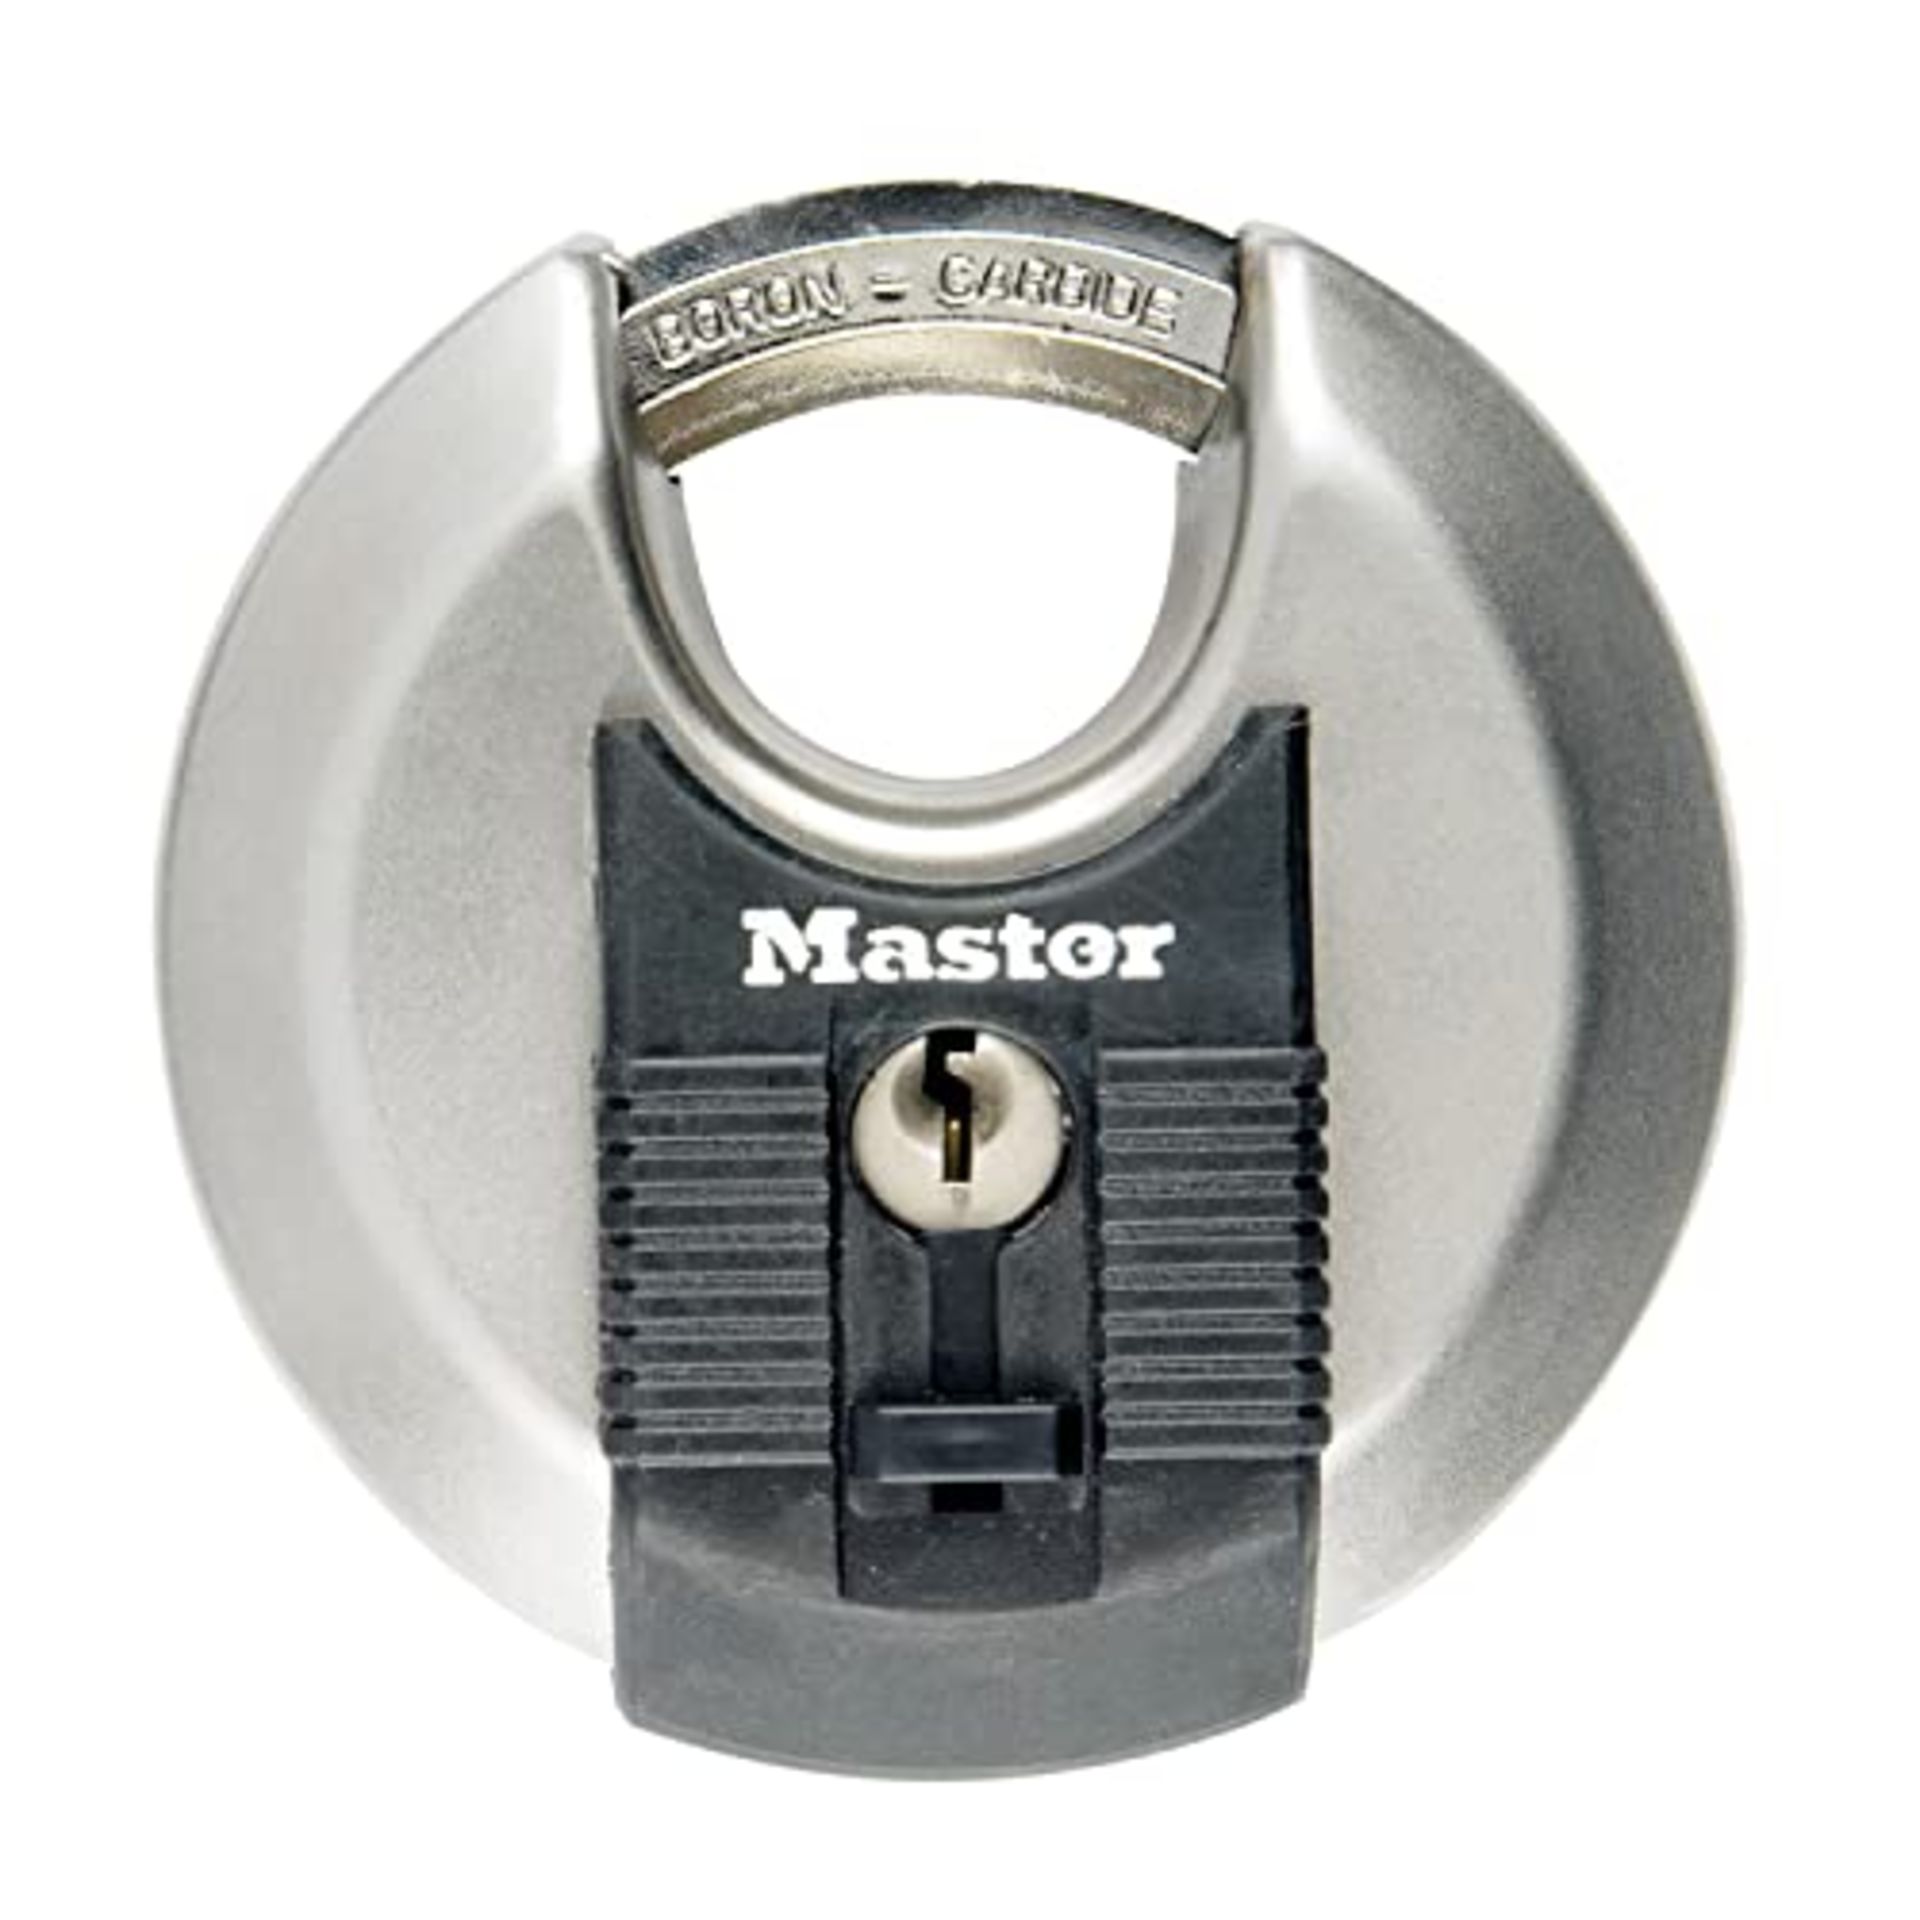 MASTER LOCK Heavy Duty Disc Padlock, Security Level 8/10, Outdoor, Keyed, Stainless St